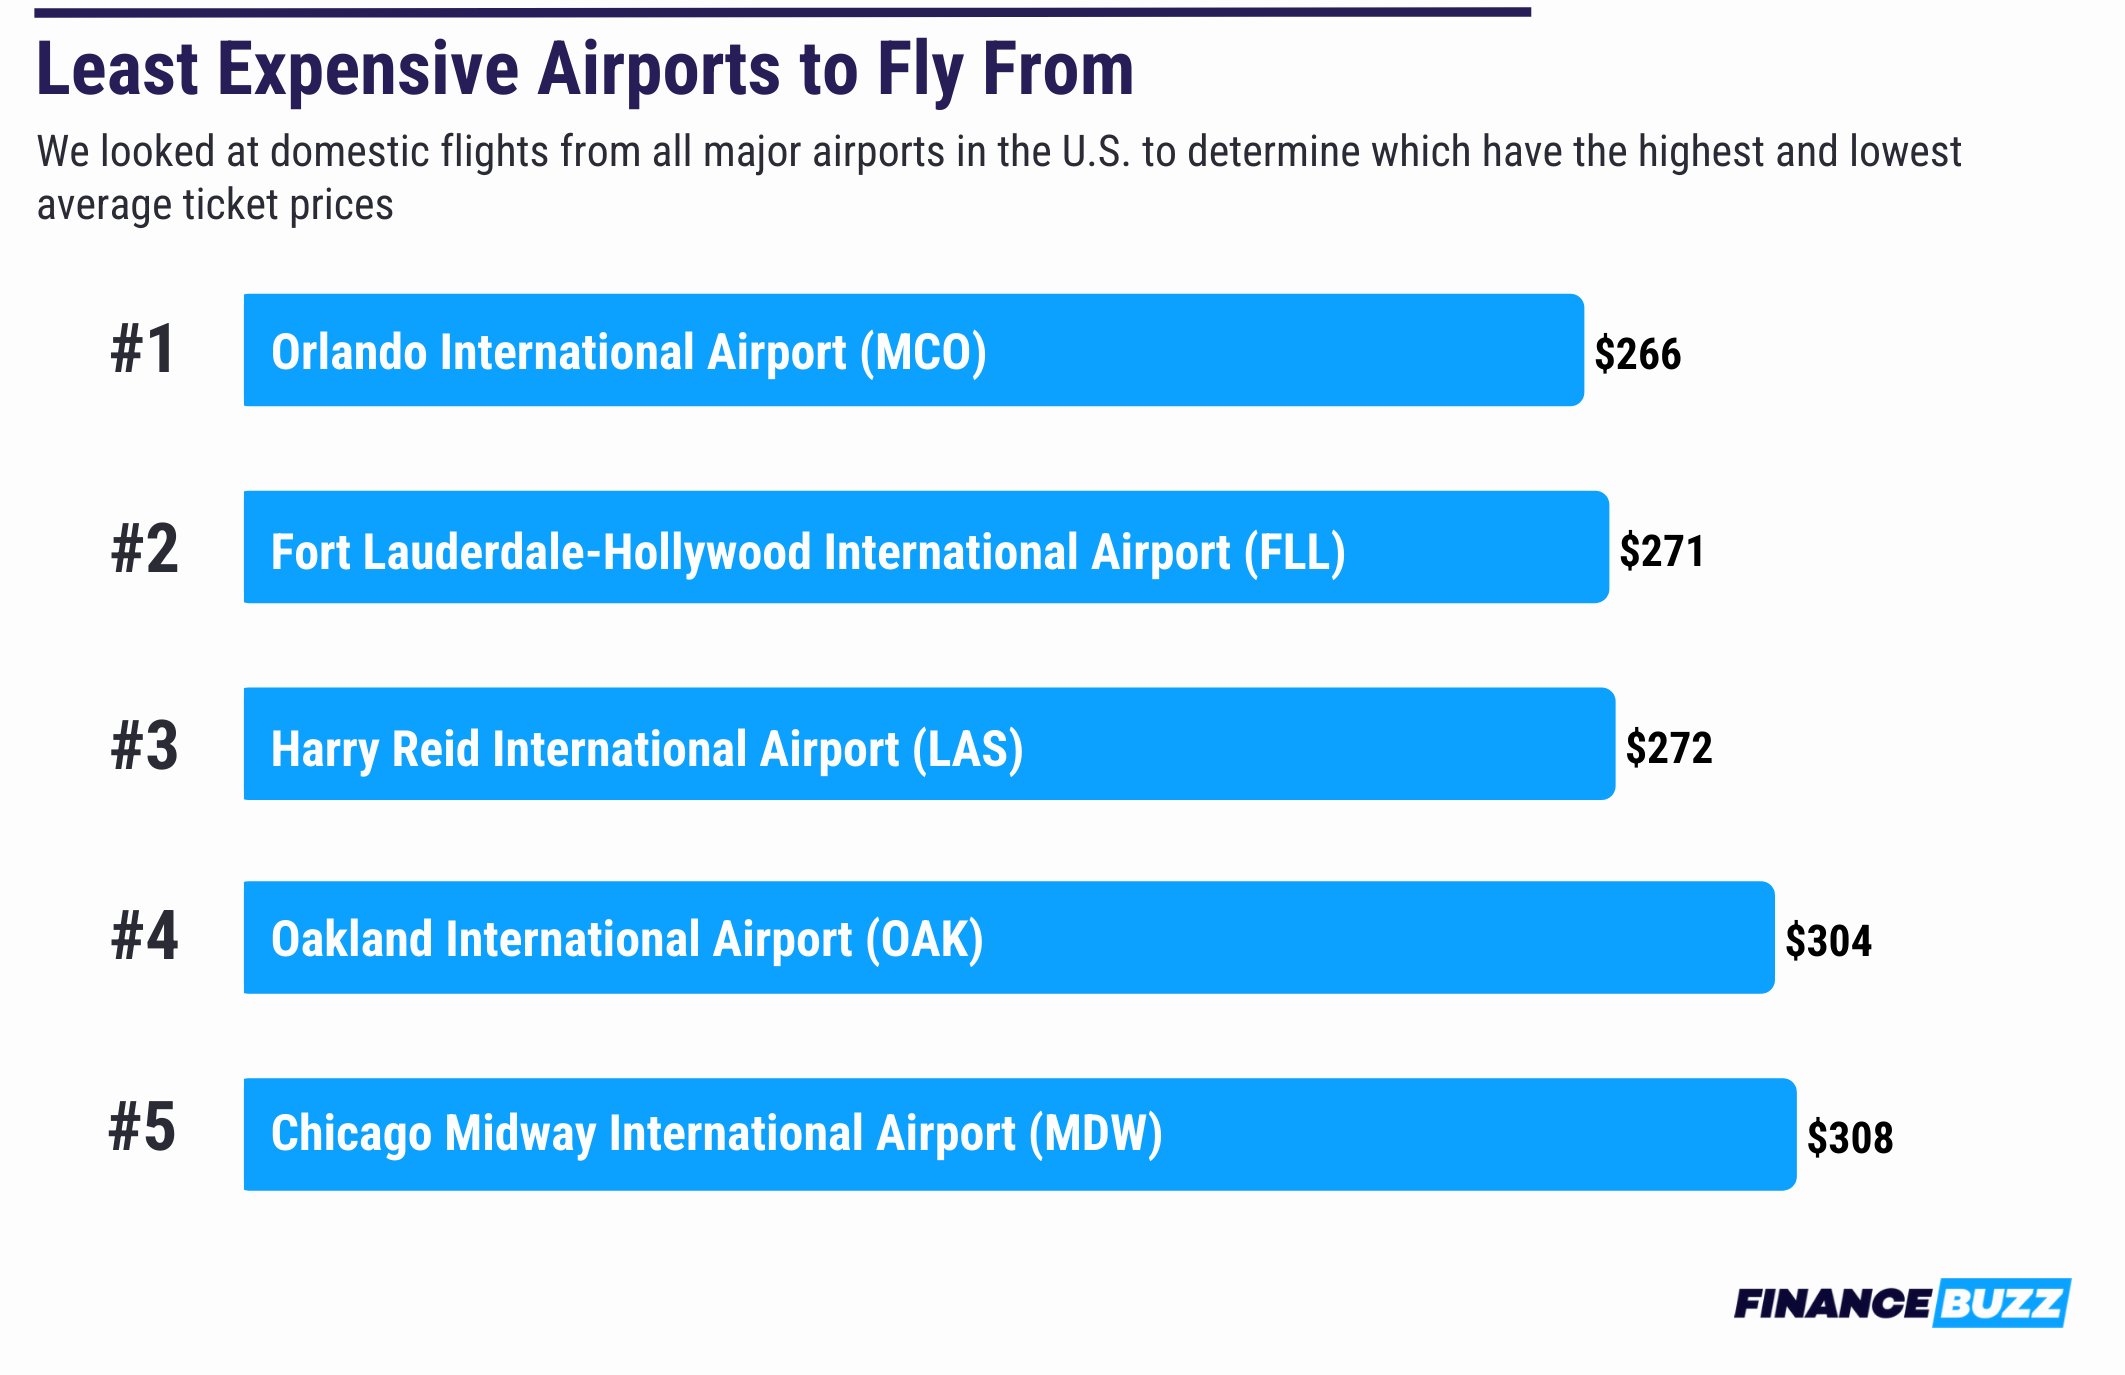 Table showing the least expensive airports to fly from.